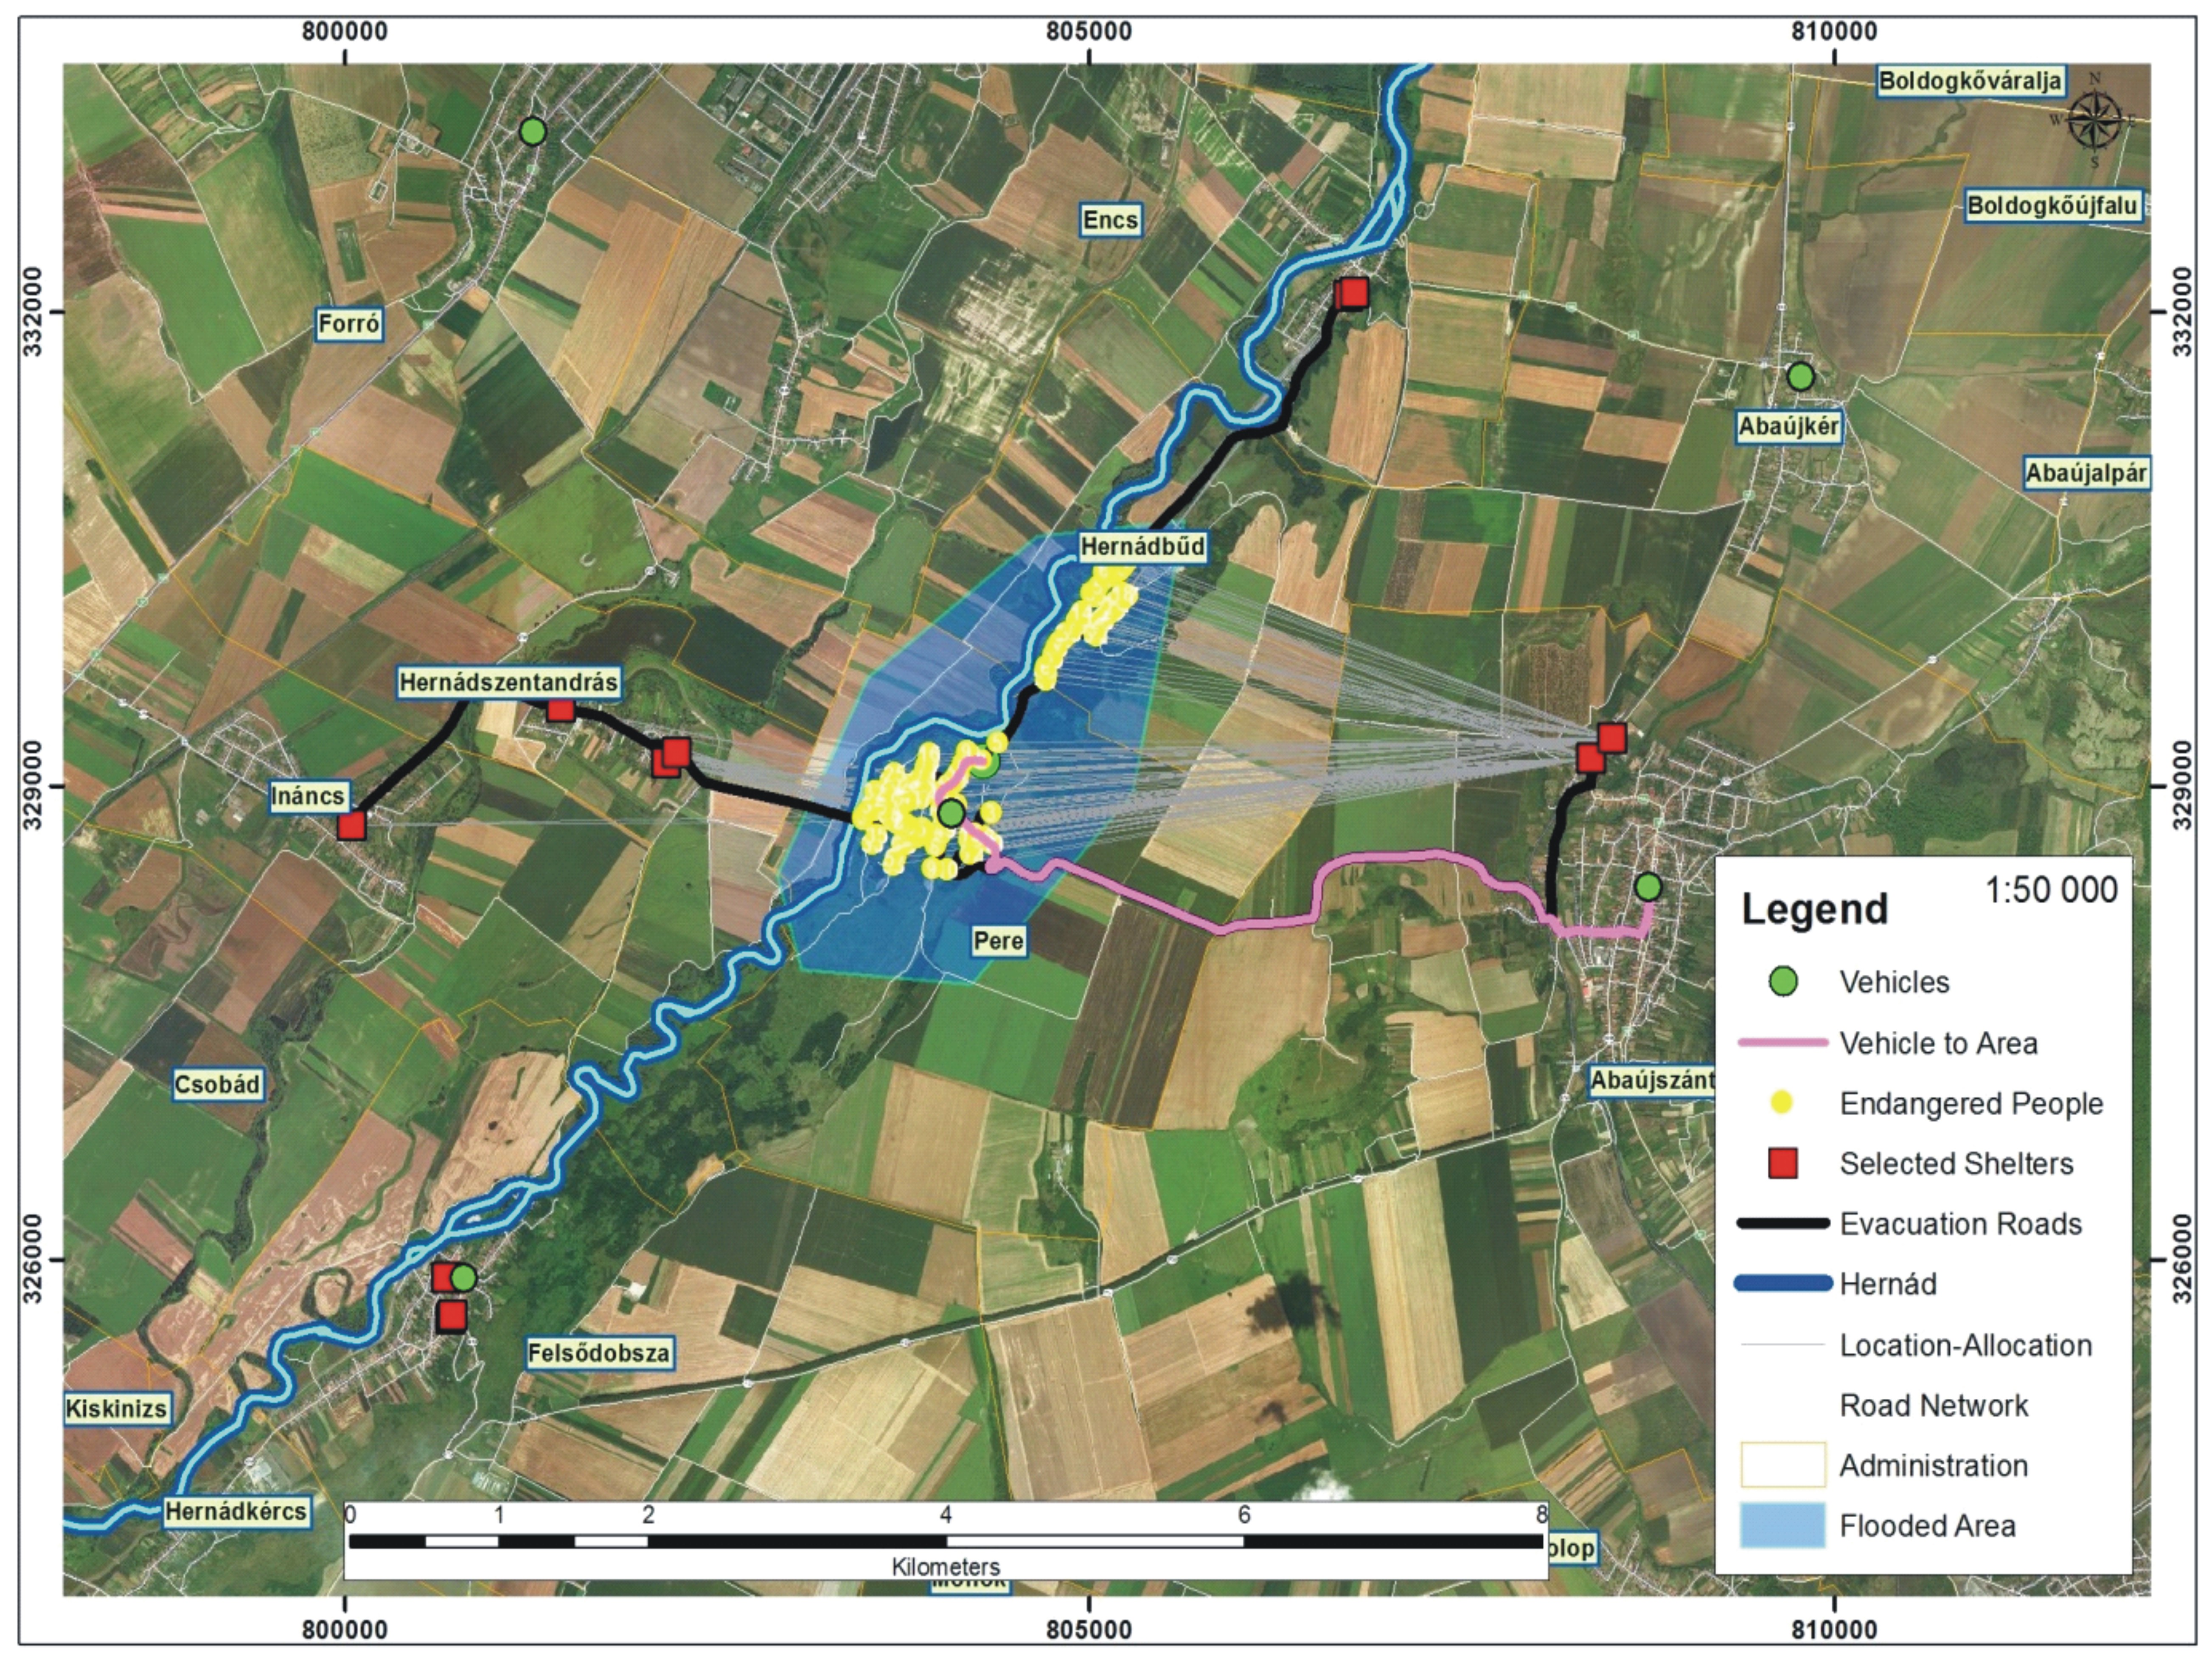 Logistic support system for flood crisis management in the Hernád/Hornád catchment